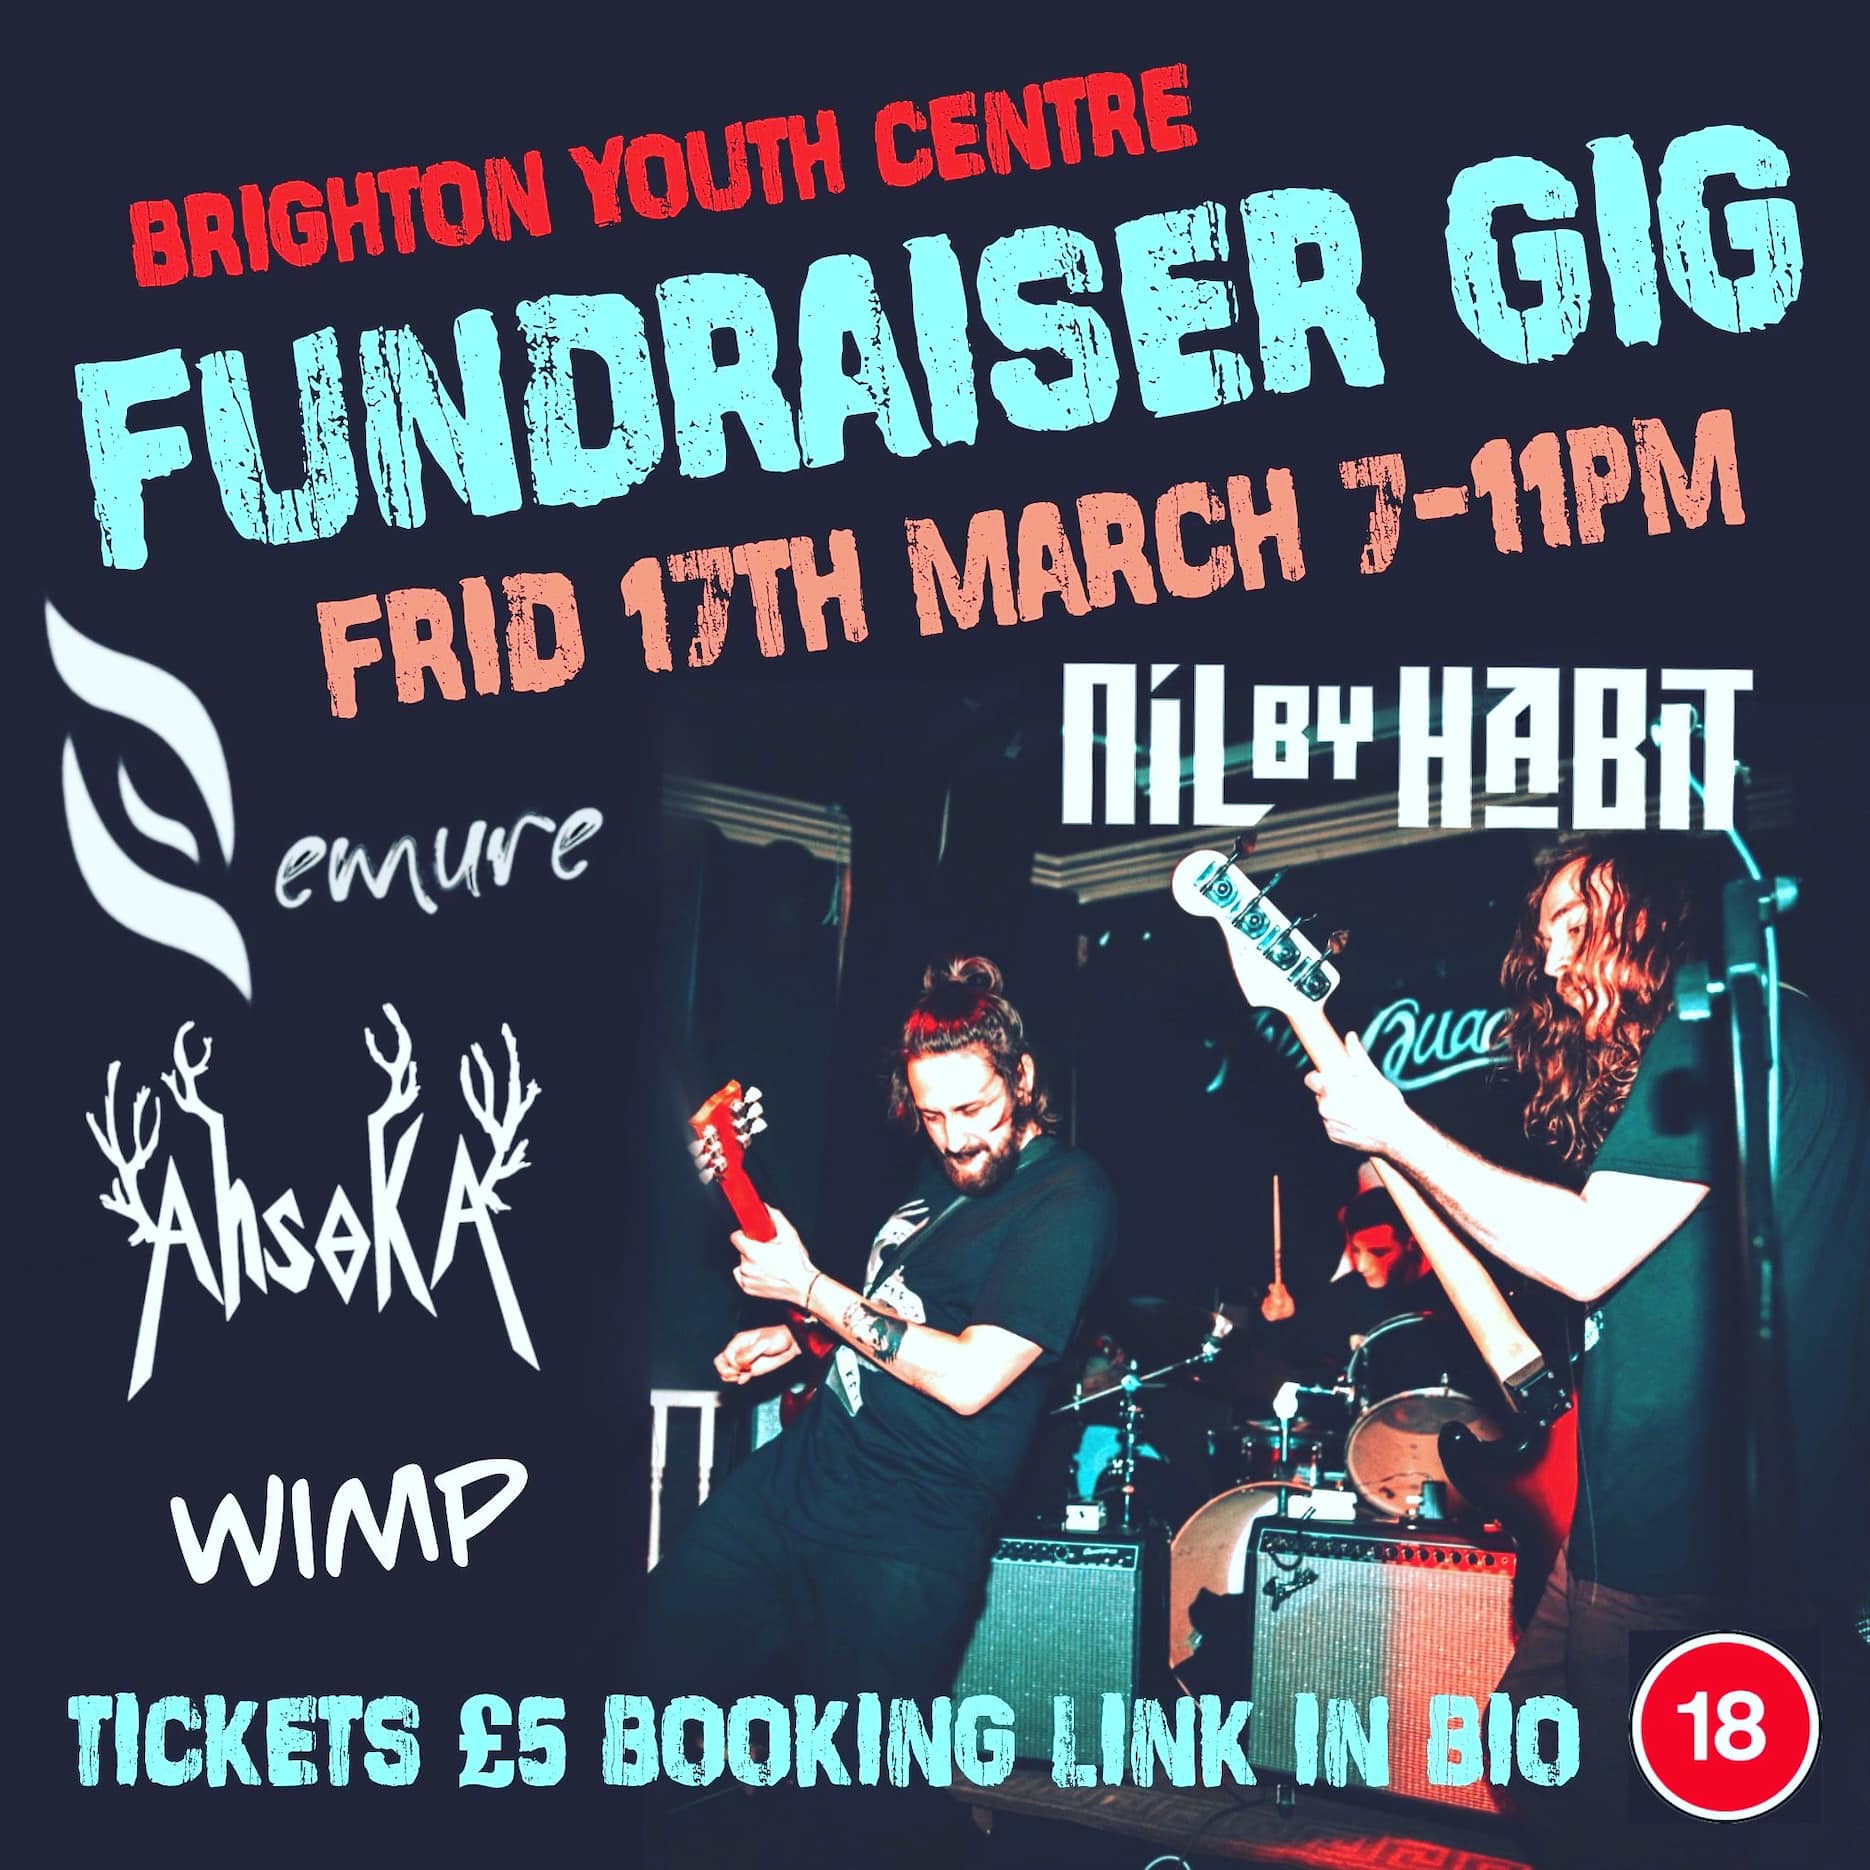 BYC Fundraiser on 17th March